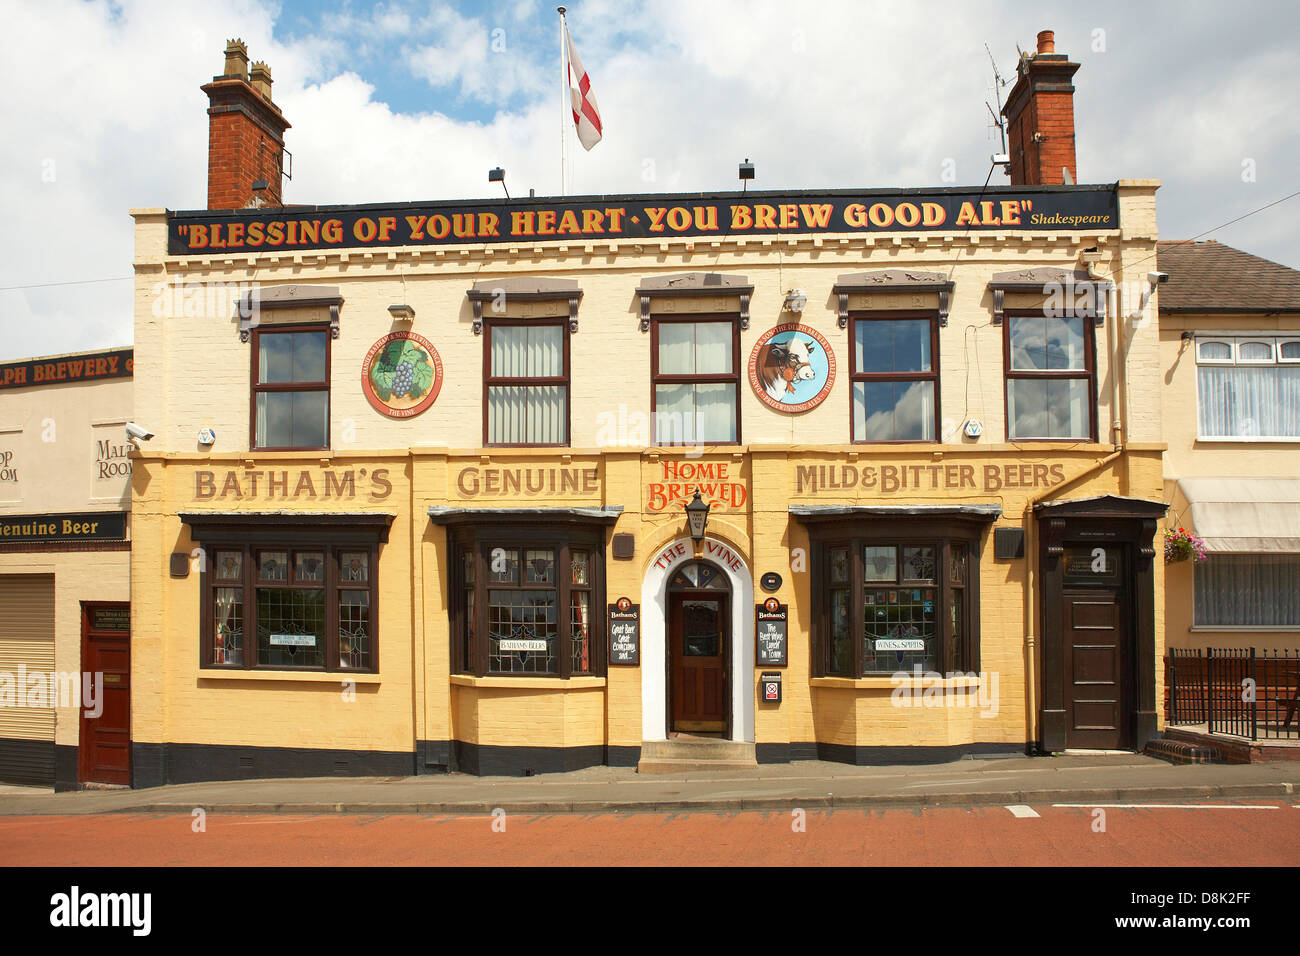 Bathams Brewery - The Vine, Brierley Hill, West Midlands Stock Photo